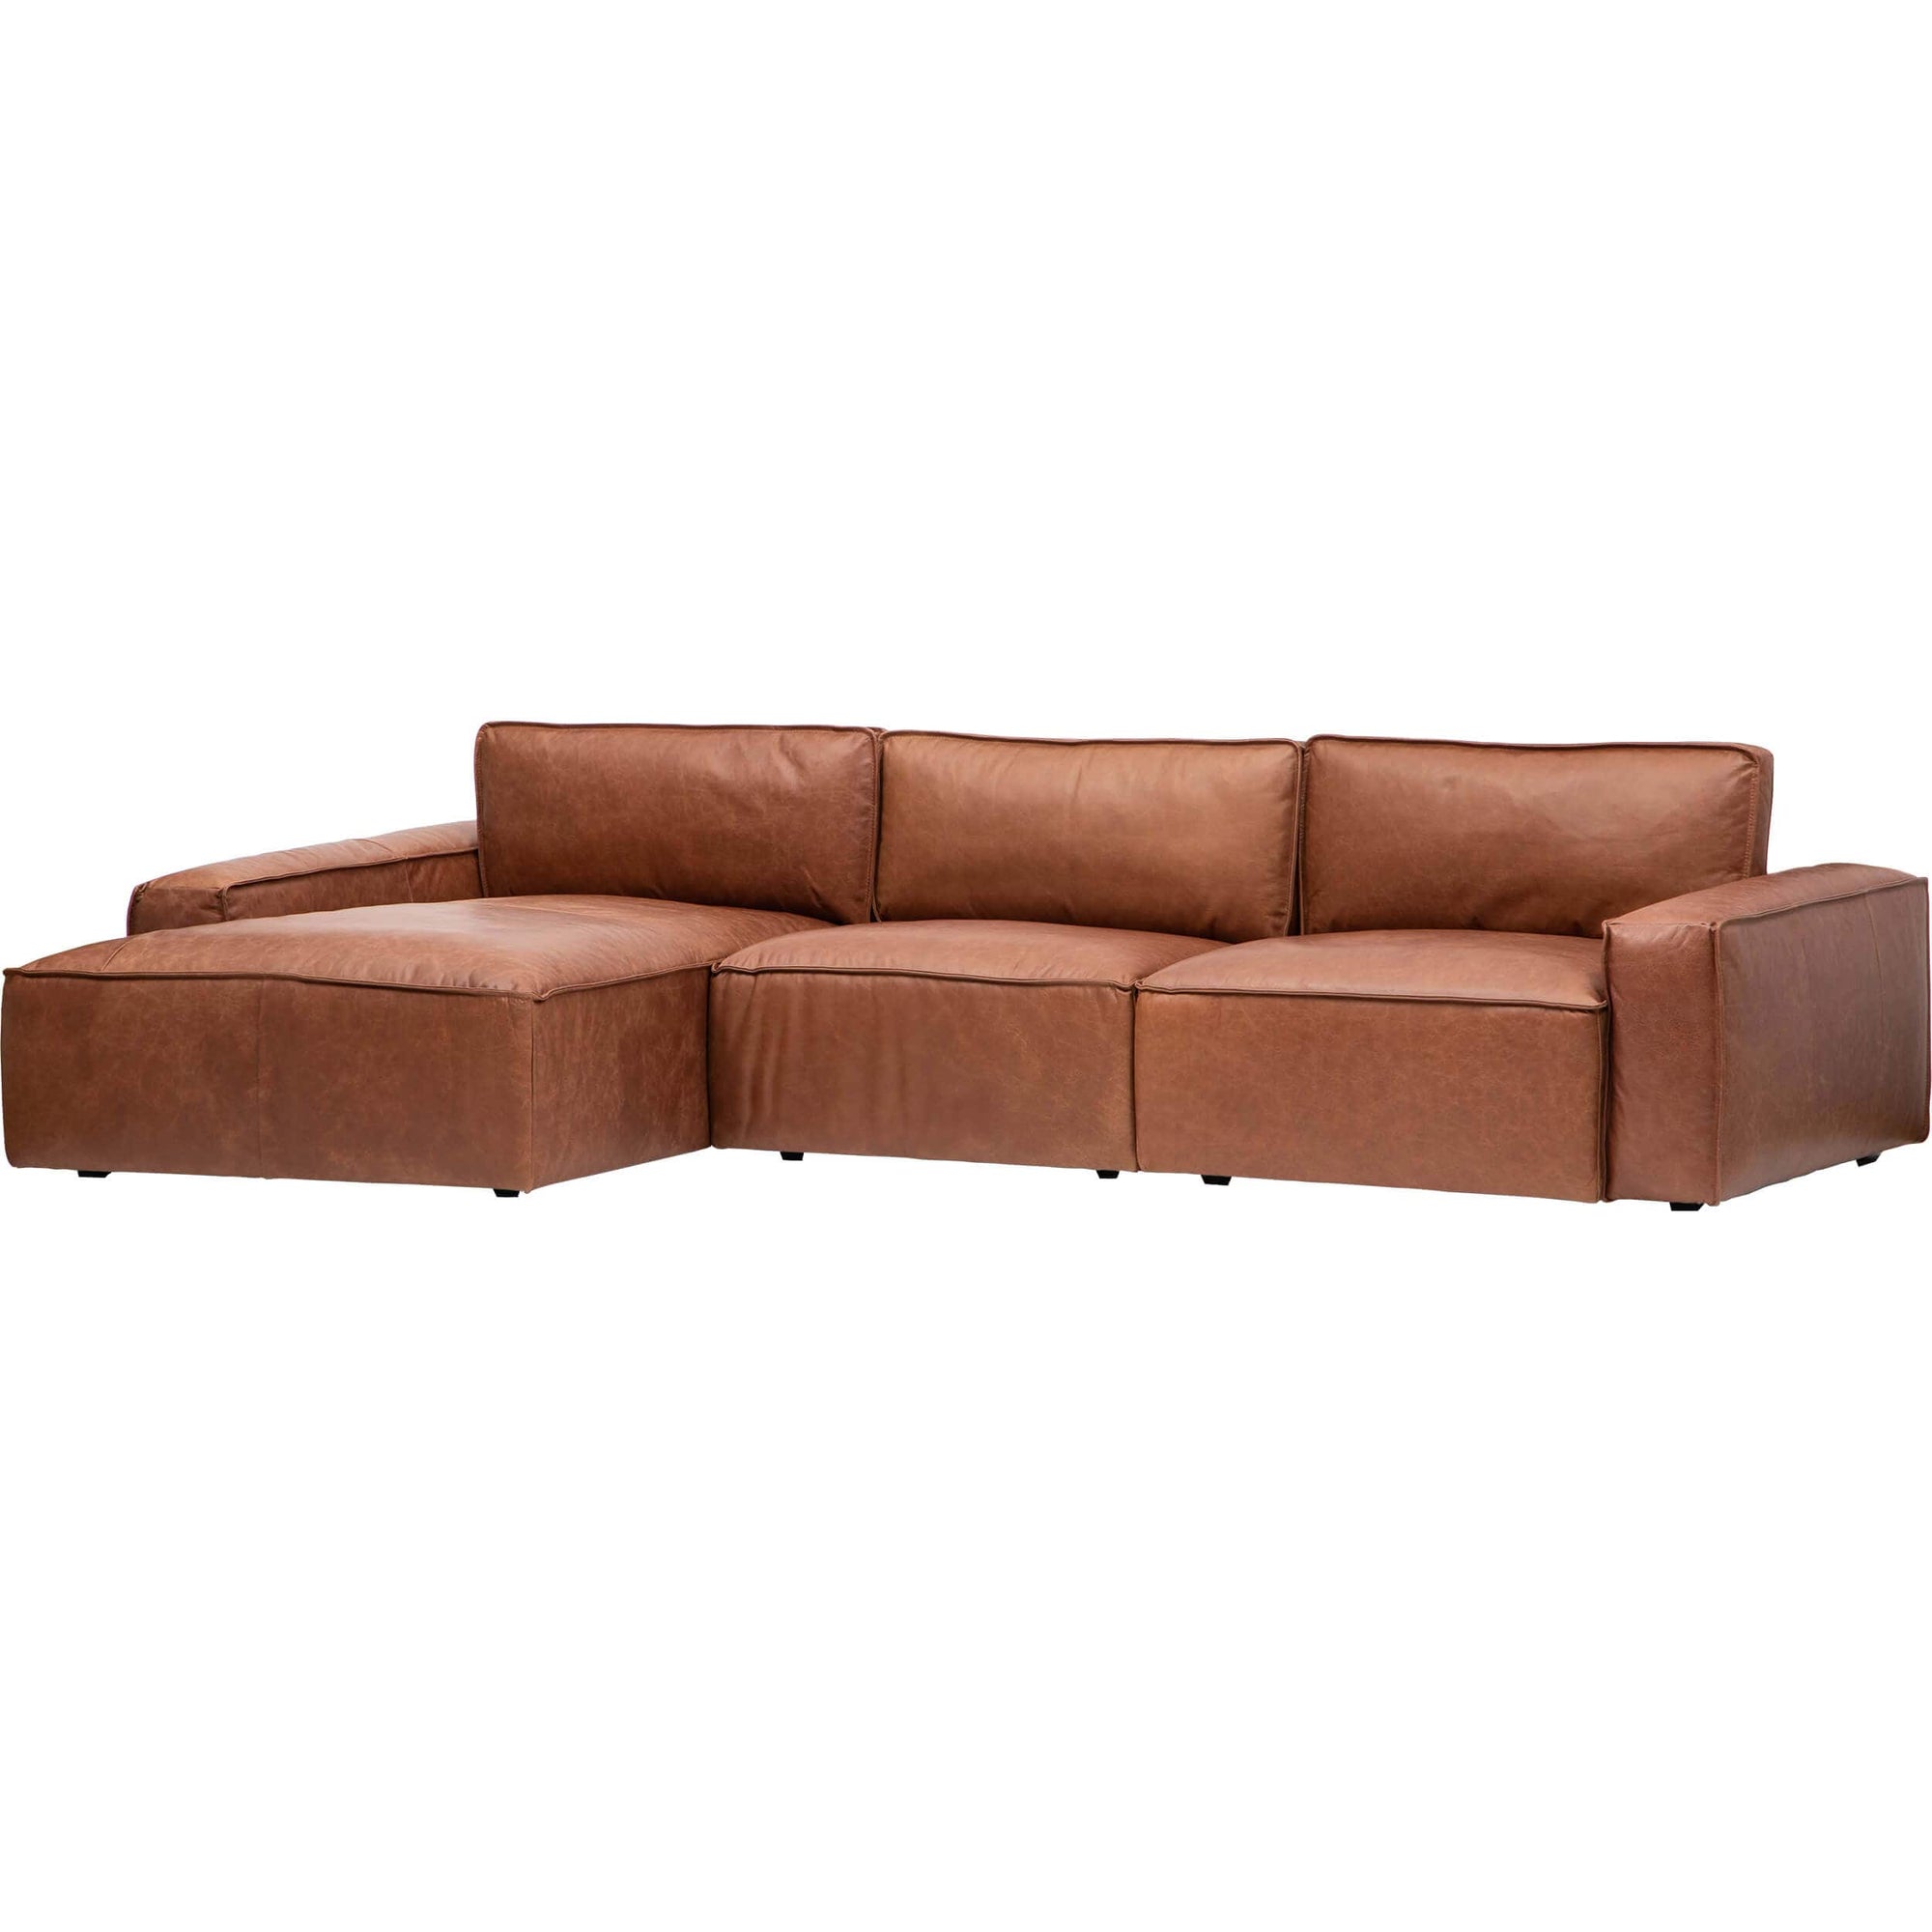 Zion Leather Sectional, Carmel Home – Marseille High Fashion